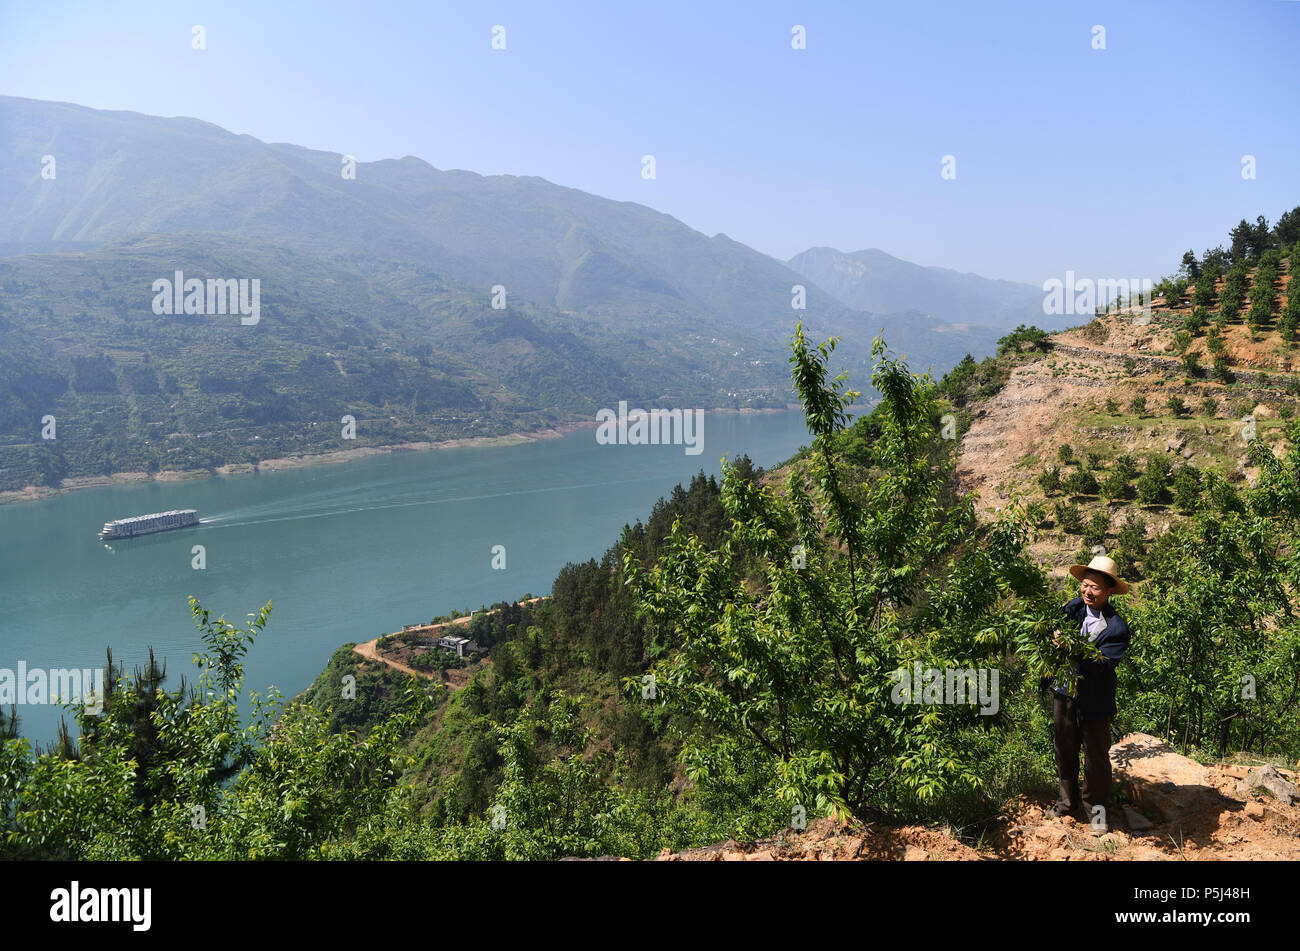 (180627) -- WUSHAN, June 27, 2018 (Xinhua) -- Wang Enhai checks the condition of green plum trees in his orchard in Quanfa Village of Wushan County, southwest China's Chongqing, April 17, 2018. Wang Enhai, 63, used to live in poverty. In 2012, he learnt to plant green plum as the local government began to promote green plum plantation and provide free seedlings, organic fertilizer and technical guidance for villagers. His hard working has been paid back as the living conditions in Wang's family gets better. He has shared his experience with other farmers and helped them with plum cultivation. Stock Photo